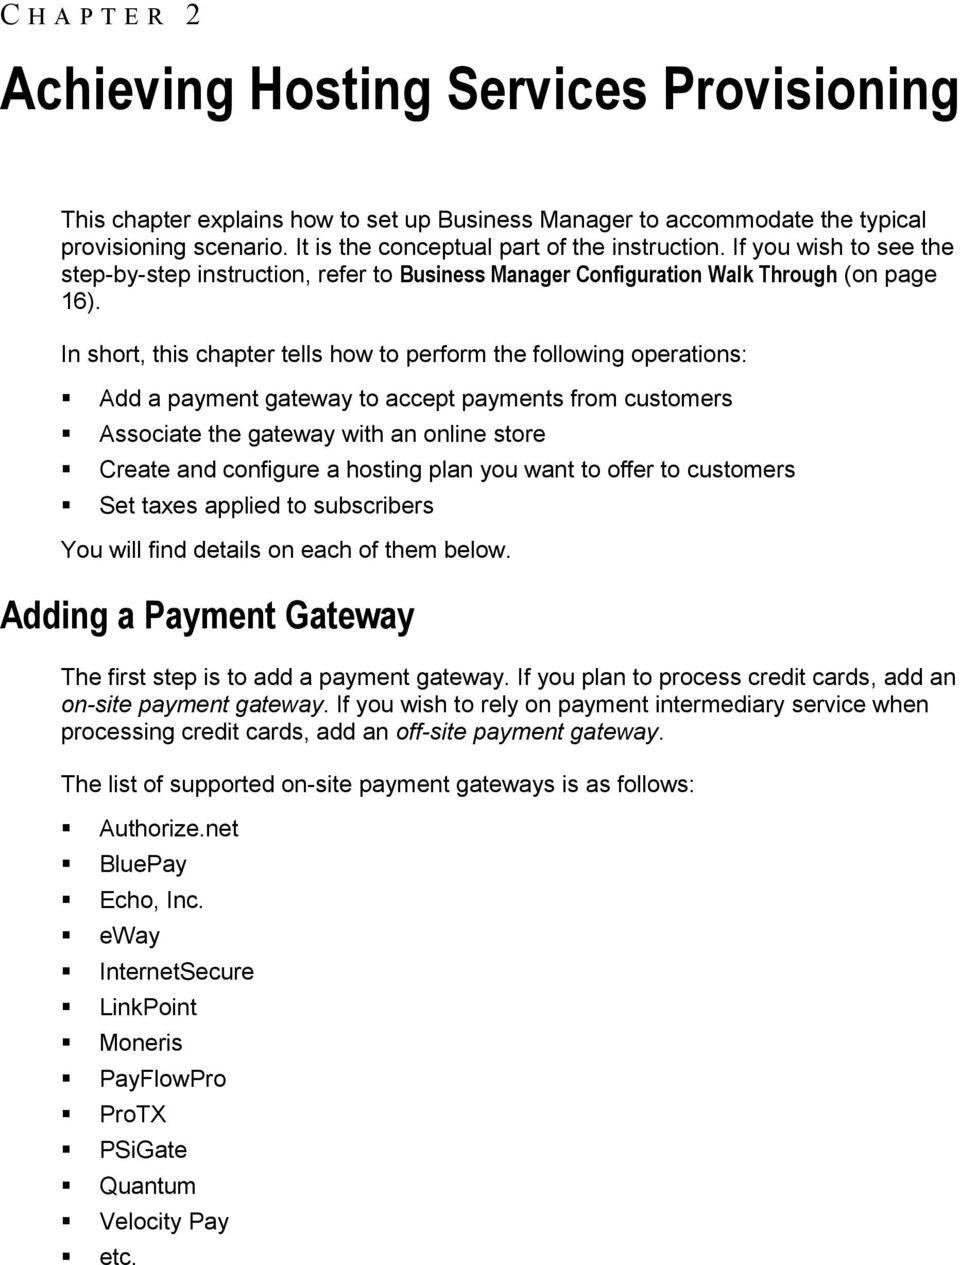 In short, this chapter tells how to perform the following operations: Add a payment gateway to accept payments from customers Associate the gateway with an online store Create and configure a hosting